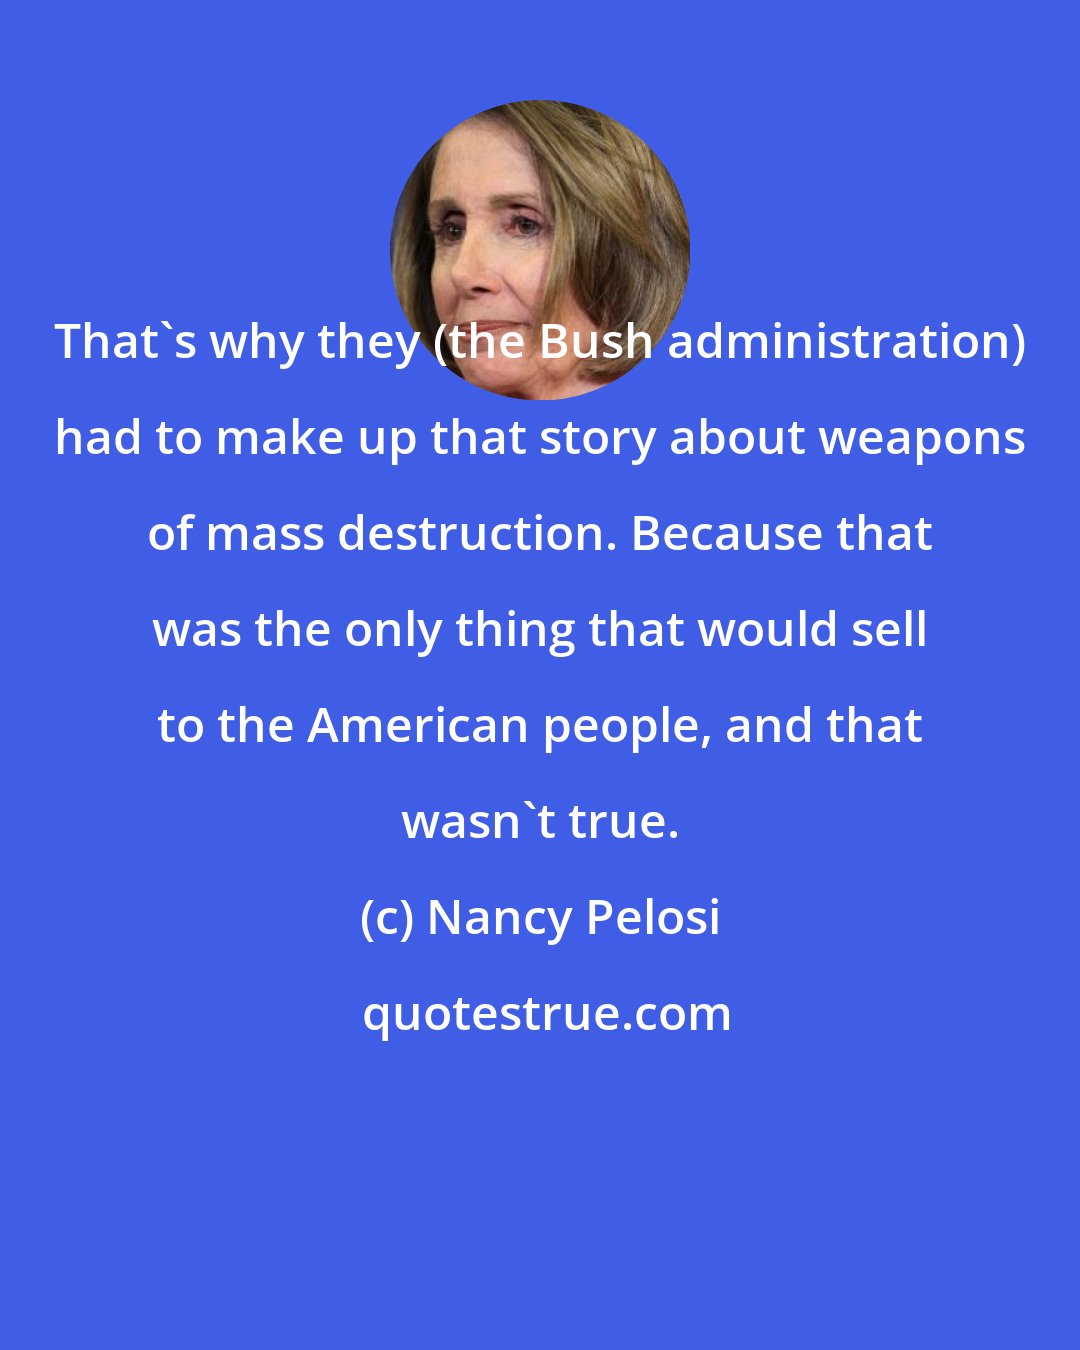 Nancy Pelosi: That's why they (the Bush administration) had to make up that story about weapons of mass destruction. Because that was the only thing that would sell to the American people, and that wasn't true.